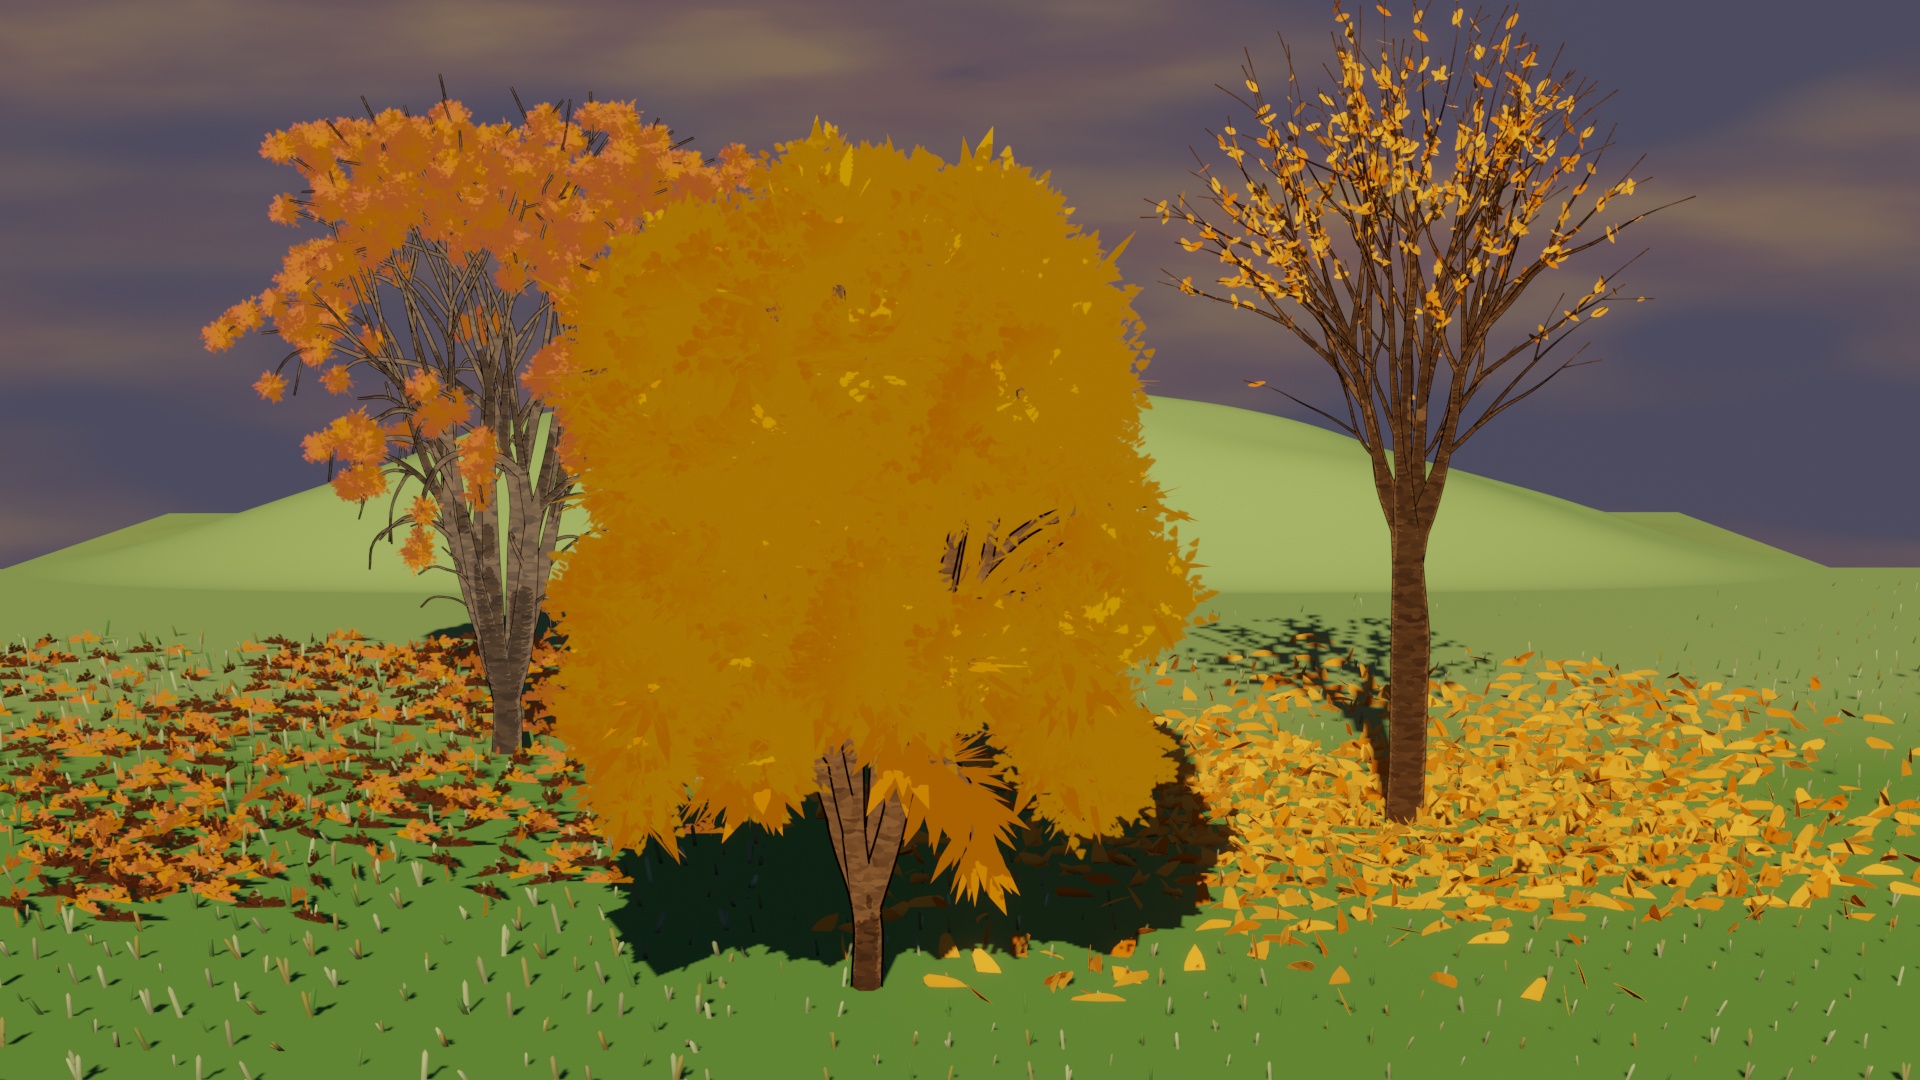 Image description: A 3D render of three trees with leaves that are mostly in shades of orange. They stand on a grassy area in a sunset with orange clouds. The tree in the middle has all of its leaves. The two trees to the side lost some of their leaves which are scattered on the grass.